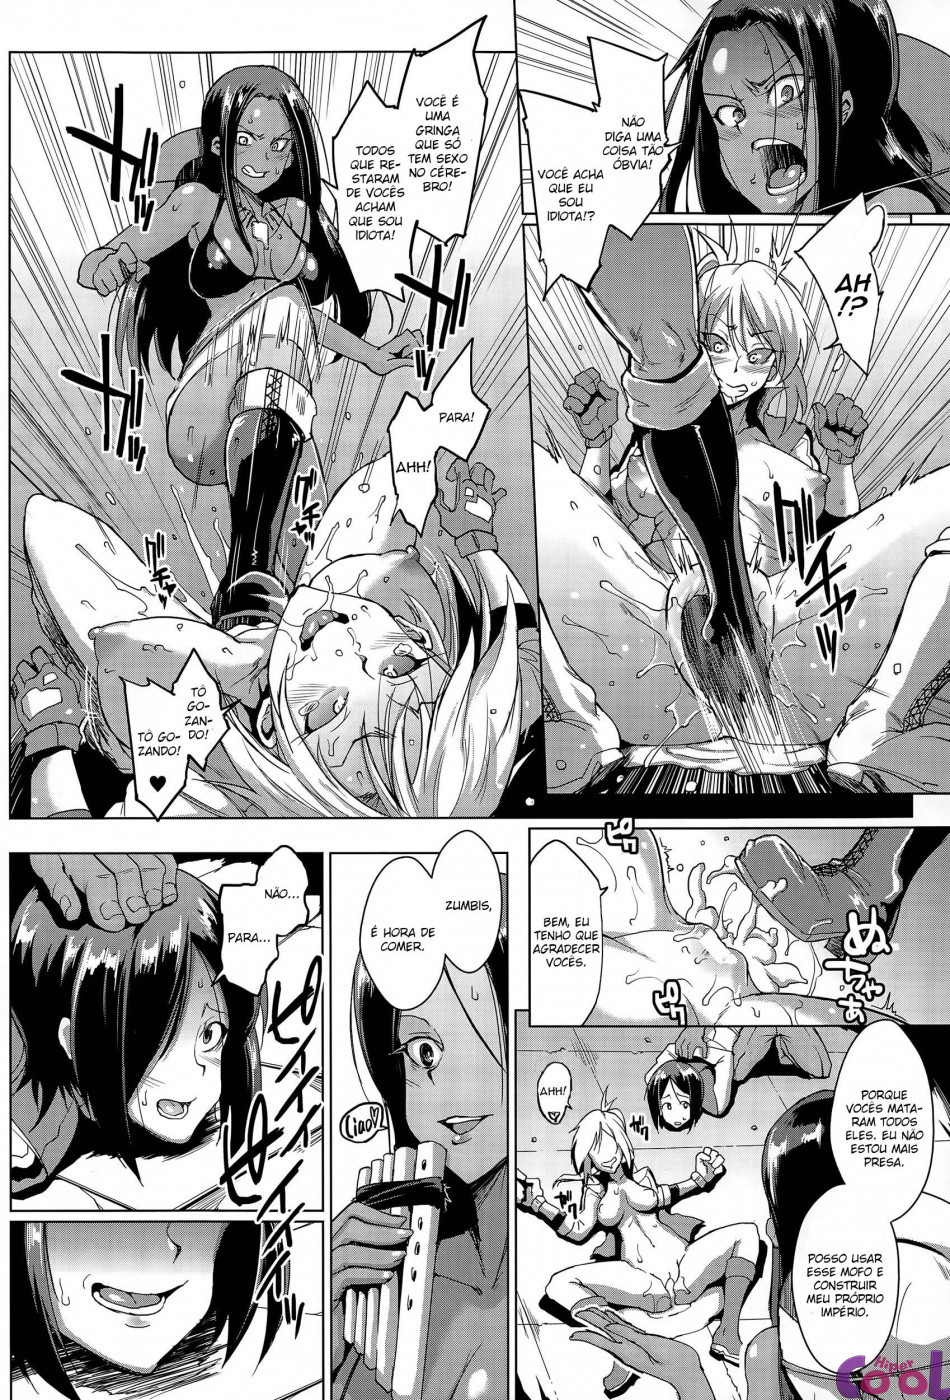 voodoo-squad-chuuhen-chapter-01-page-10.jpg